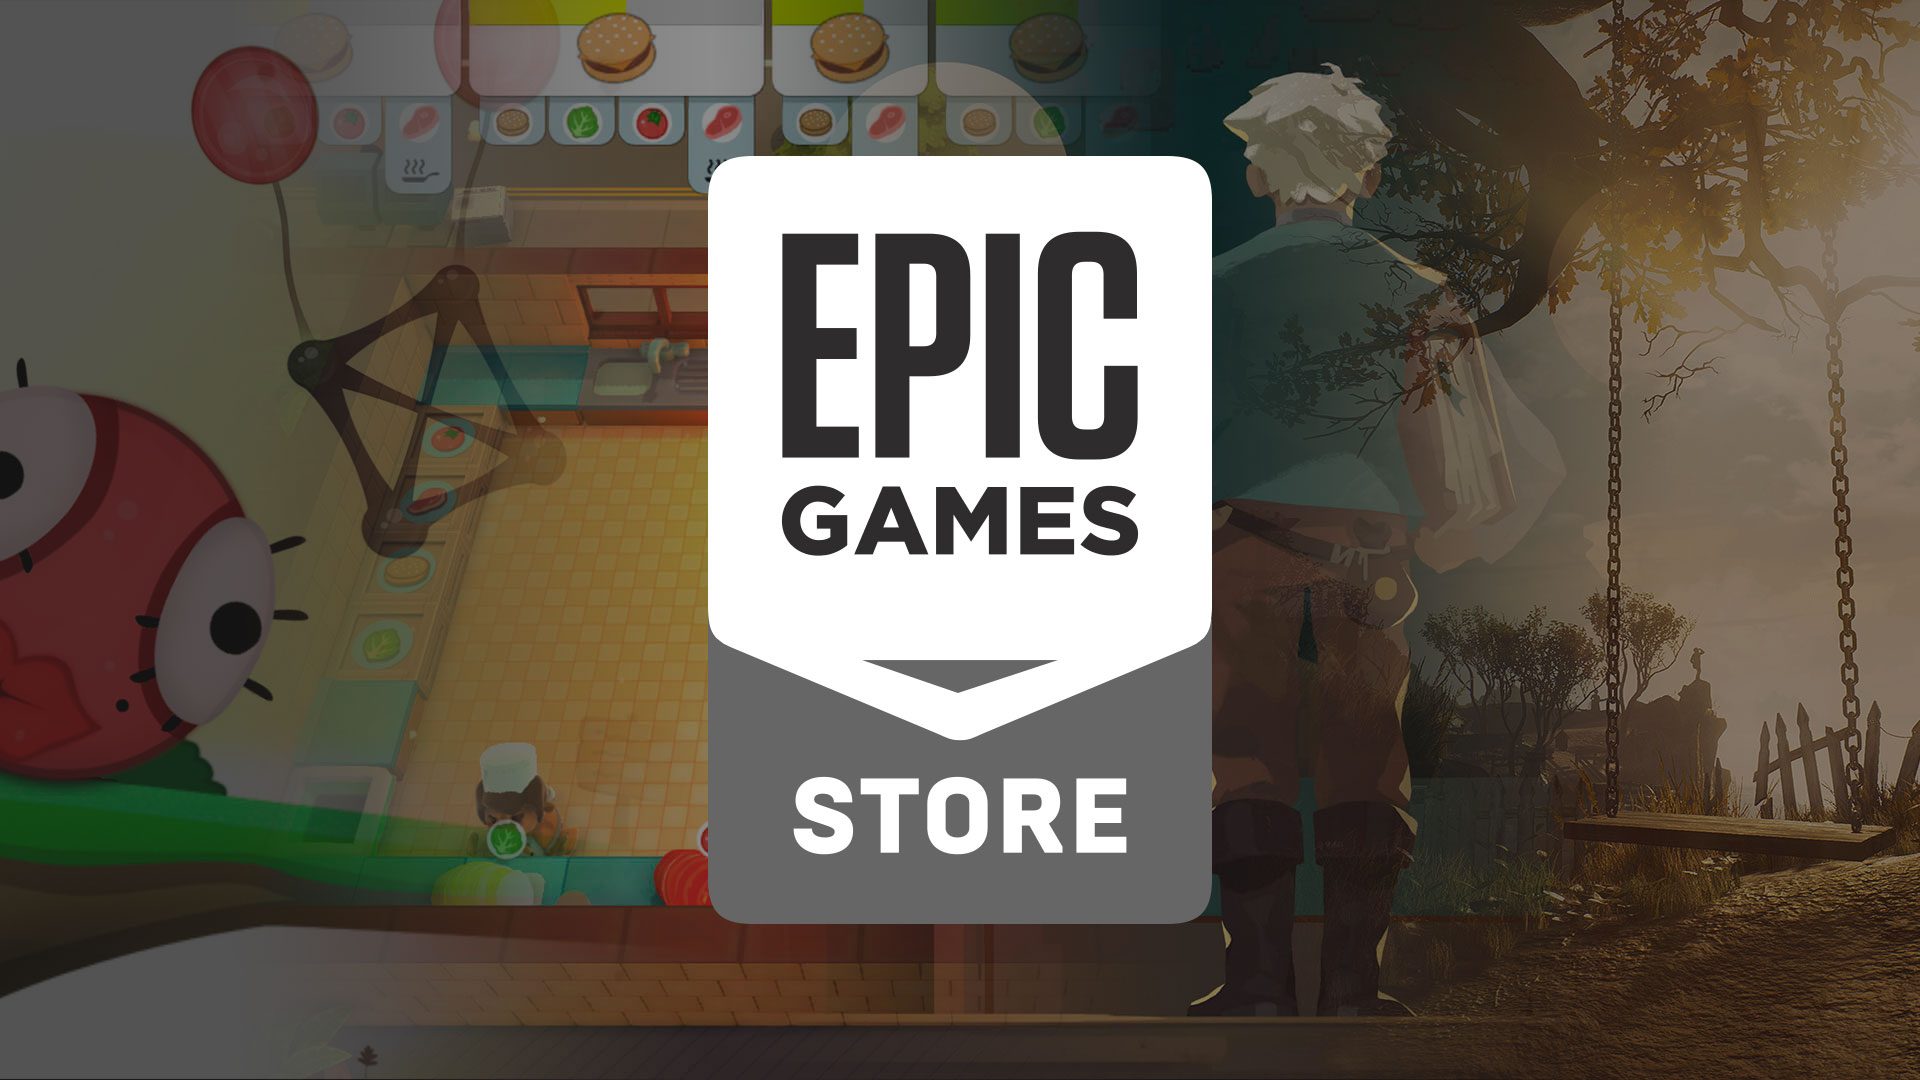 Next week’s free game from Epic is about surviving the apocalypse